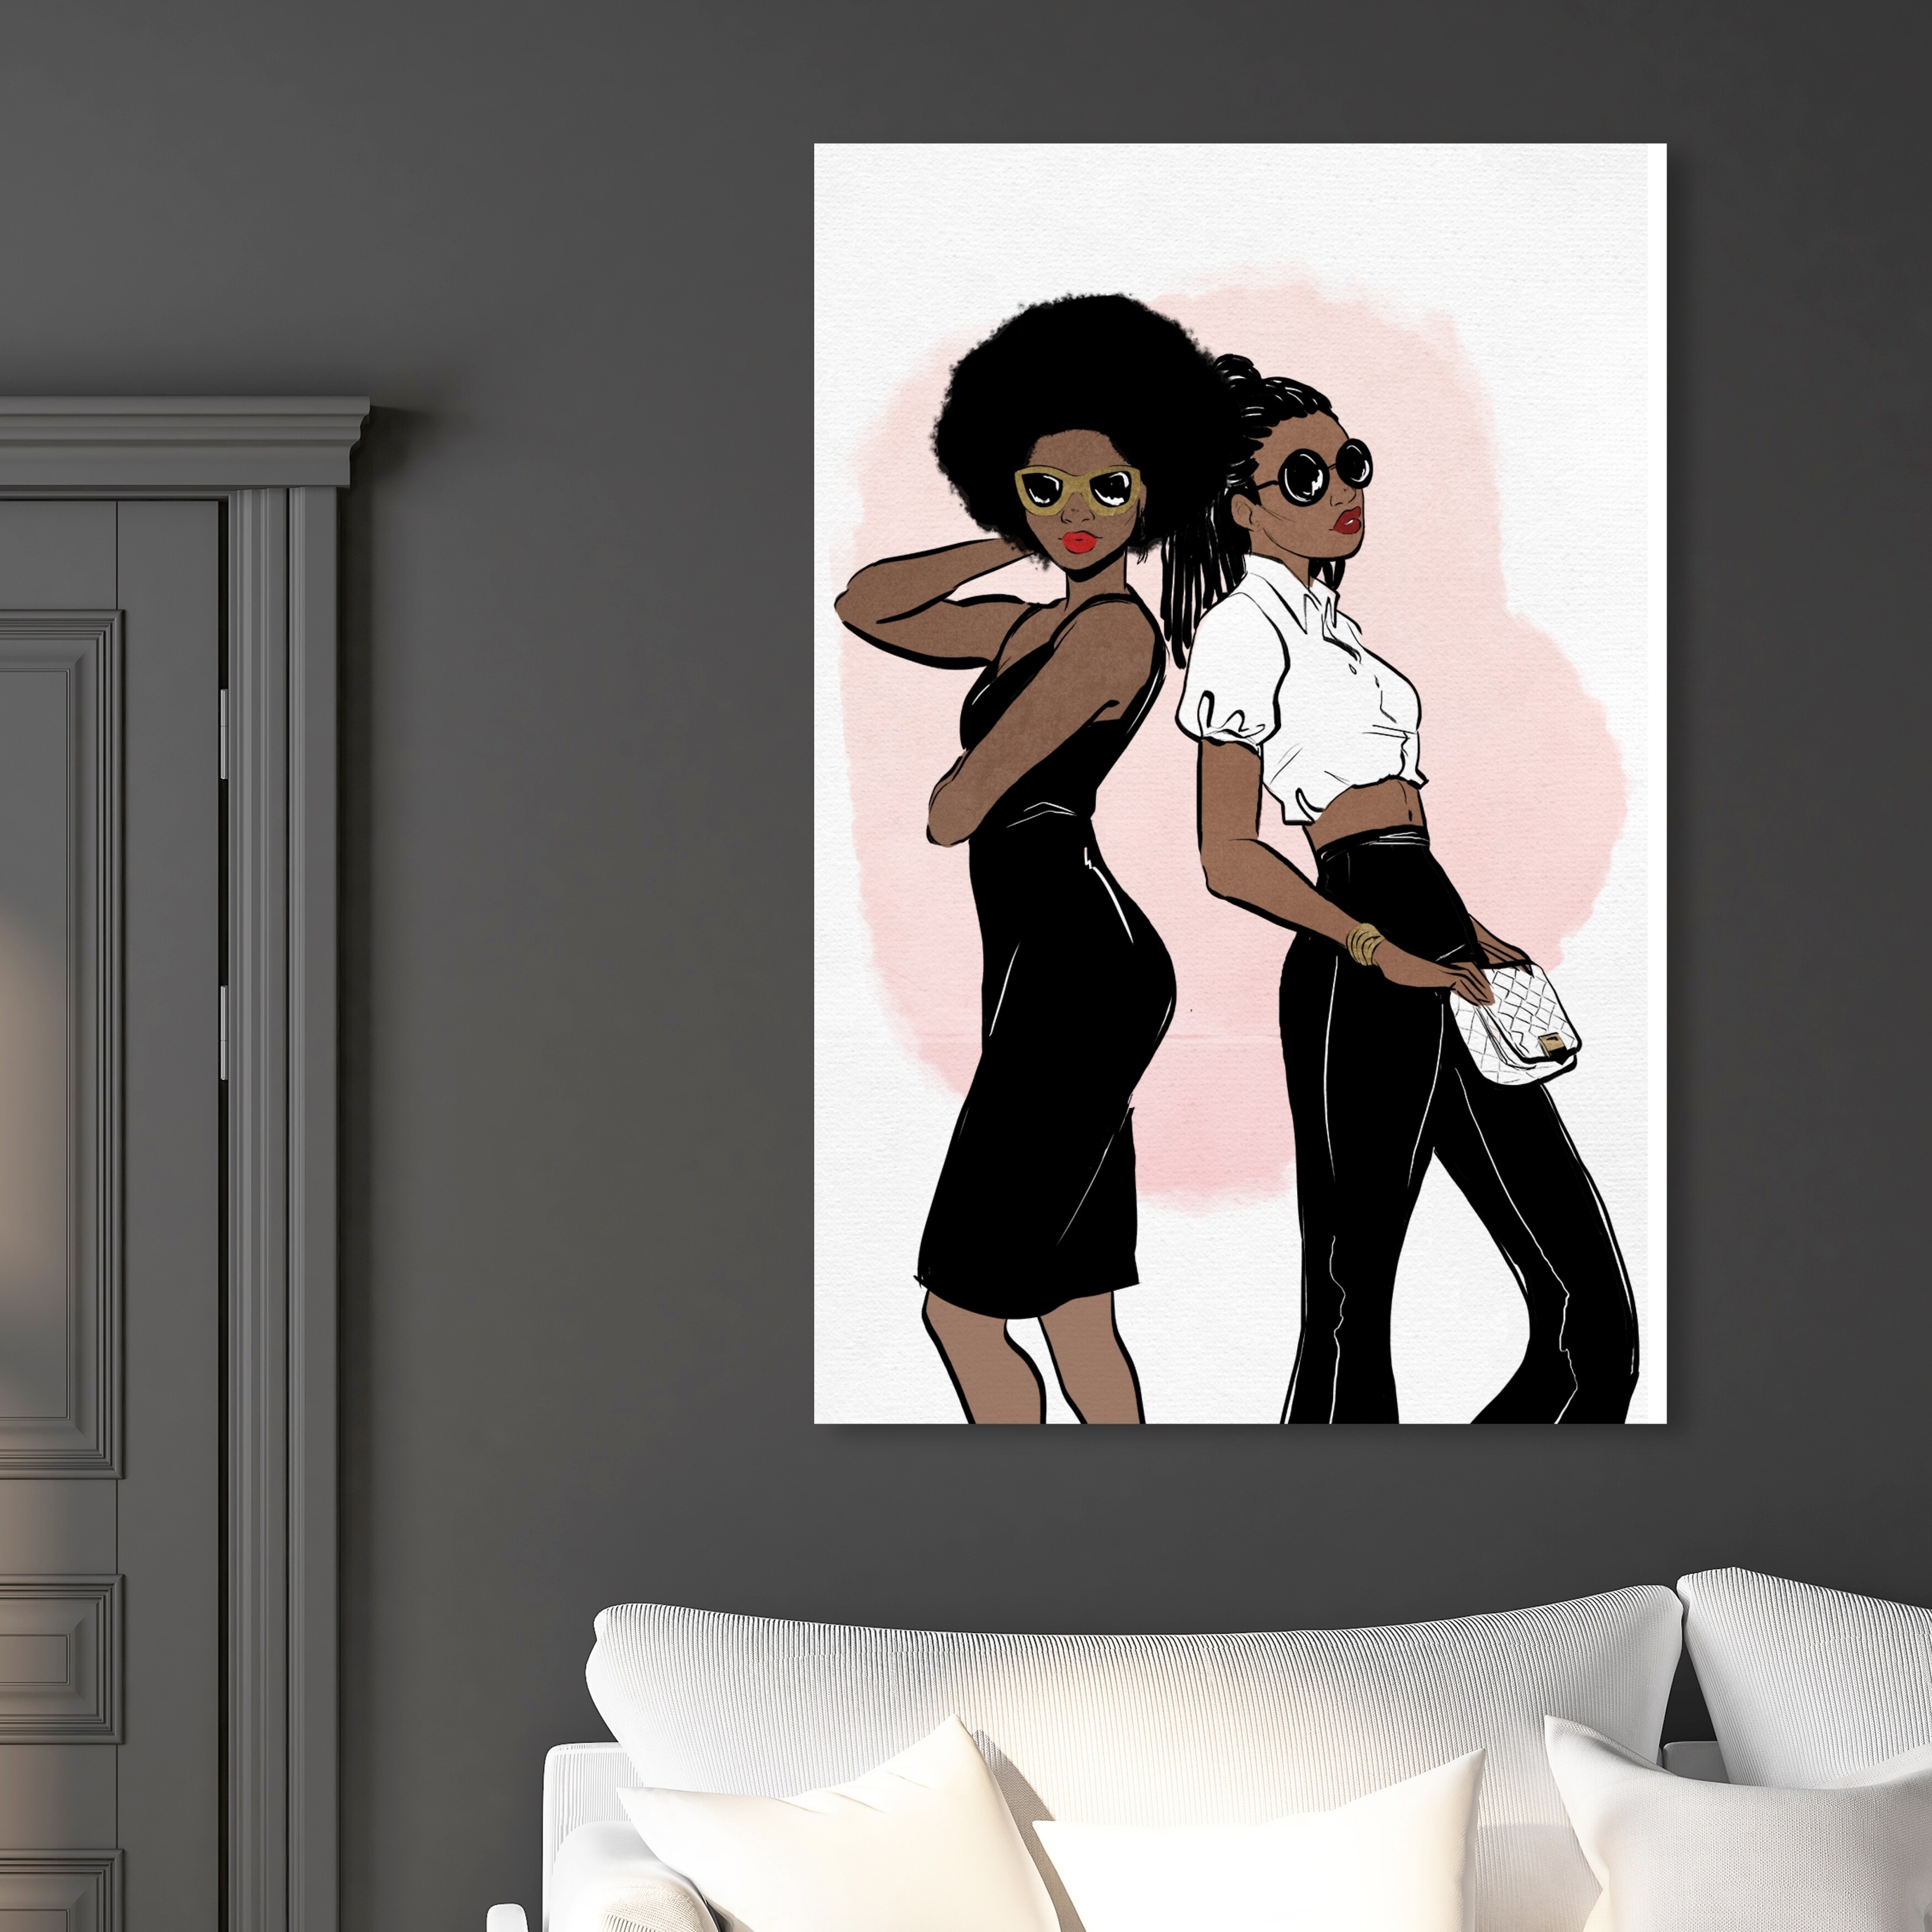 Oliver Gal 'Glamorous Best Friends' Fashion and Glam Wall Art Canvas Print  - Pink, Black - Bed Bath & Beyond - 28416991